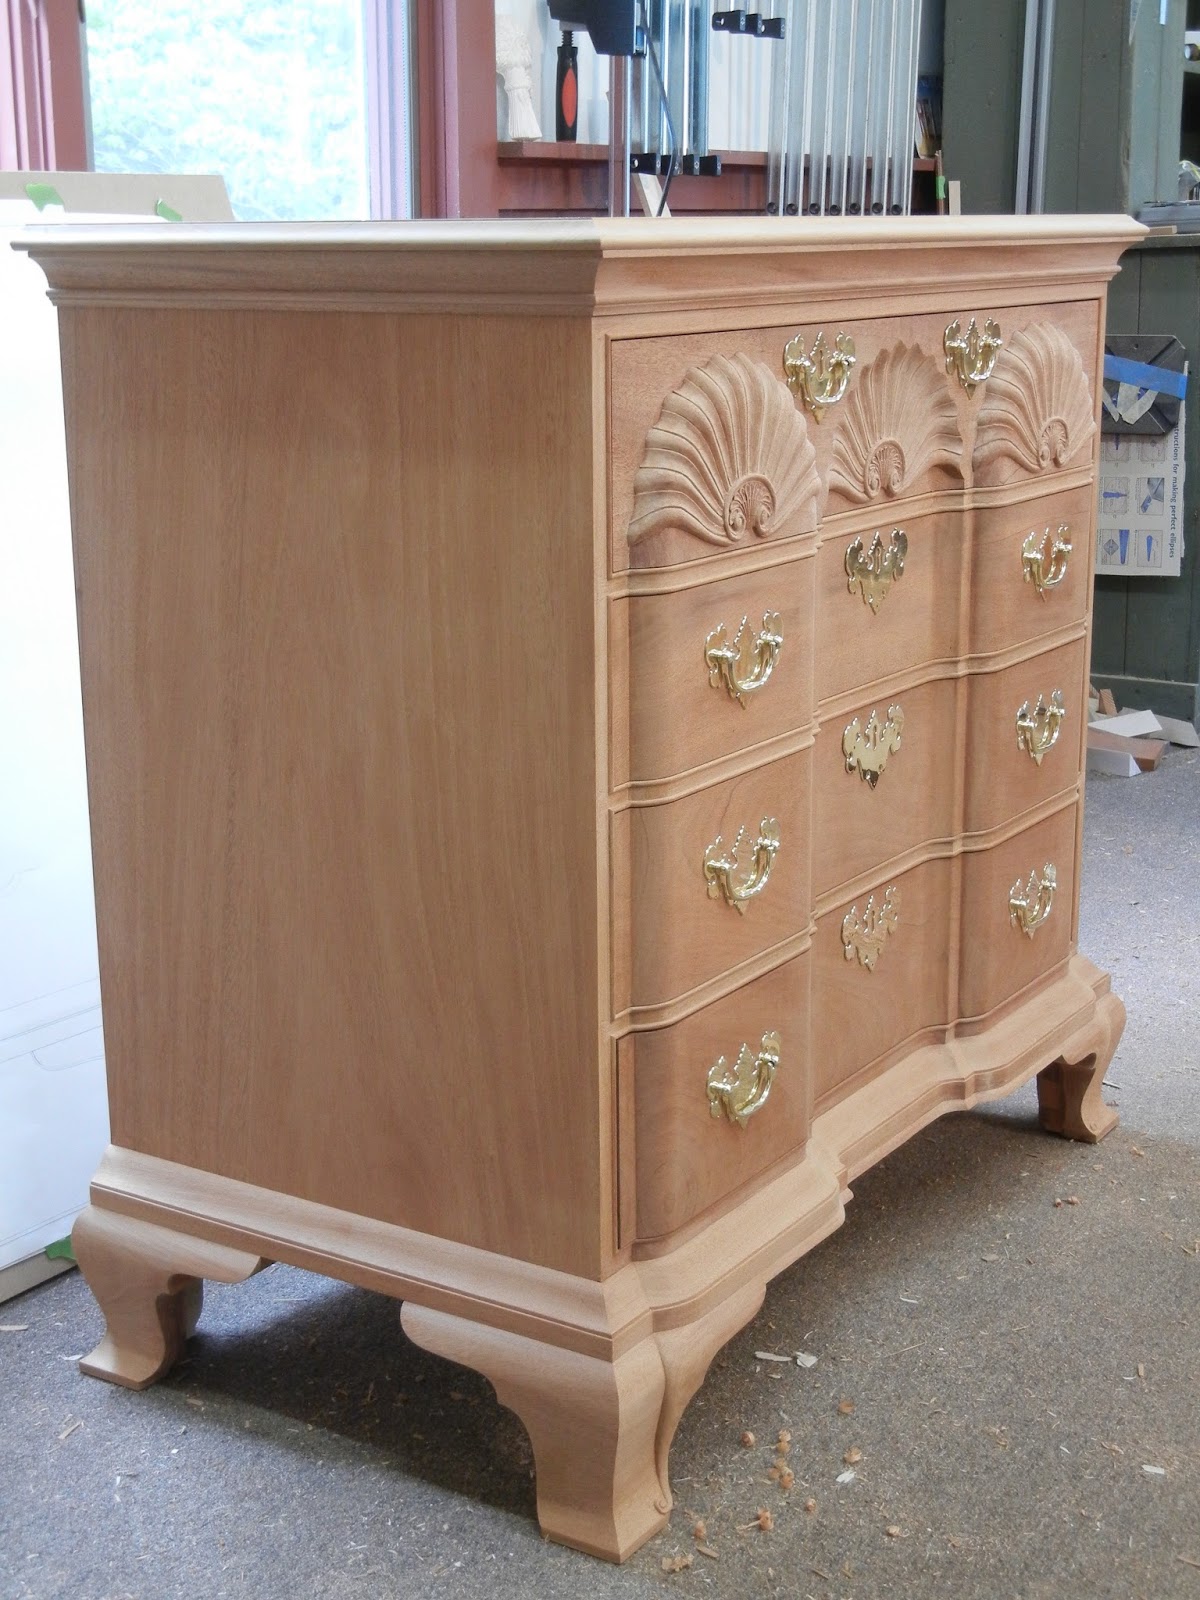 Townsend Goddard Reproduction Furniture